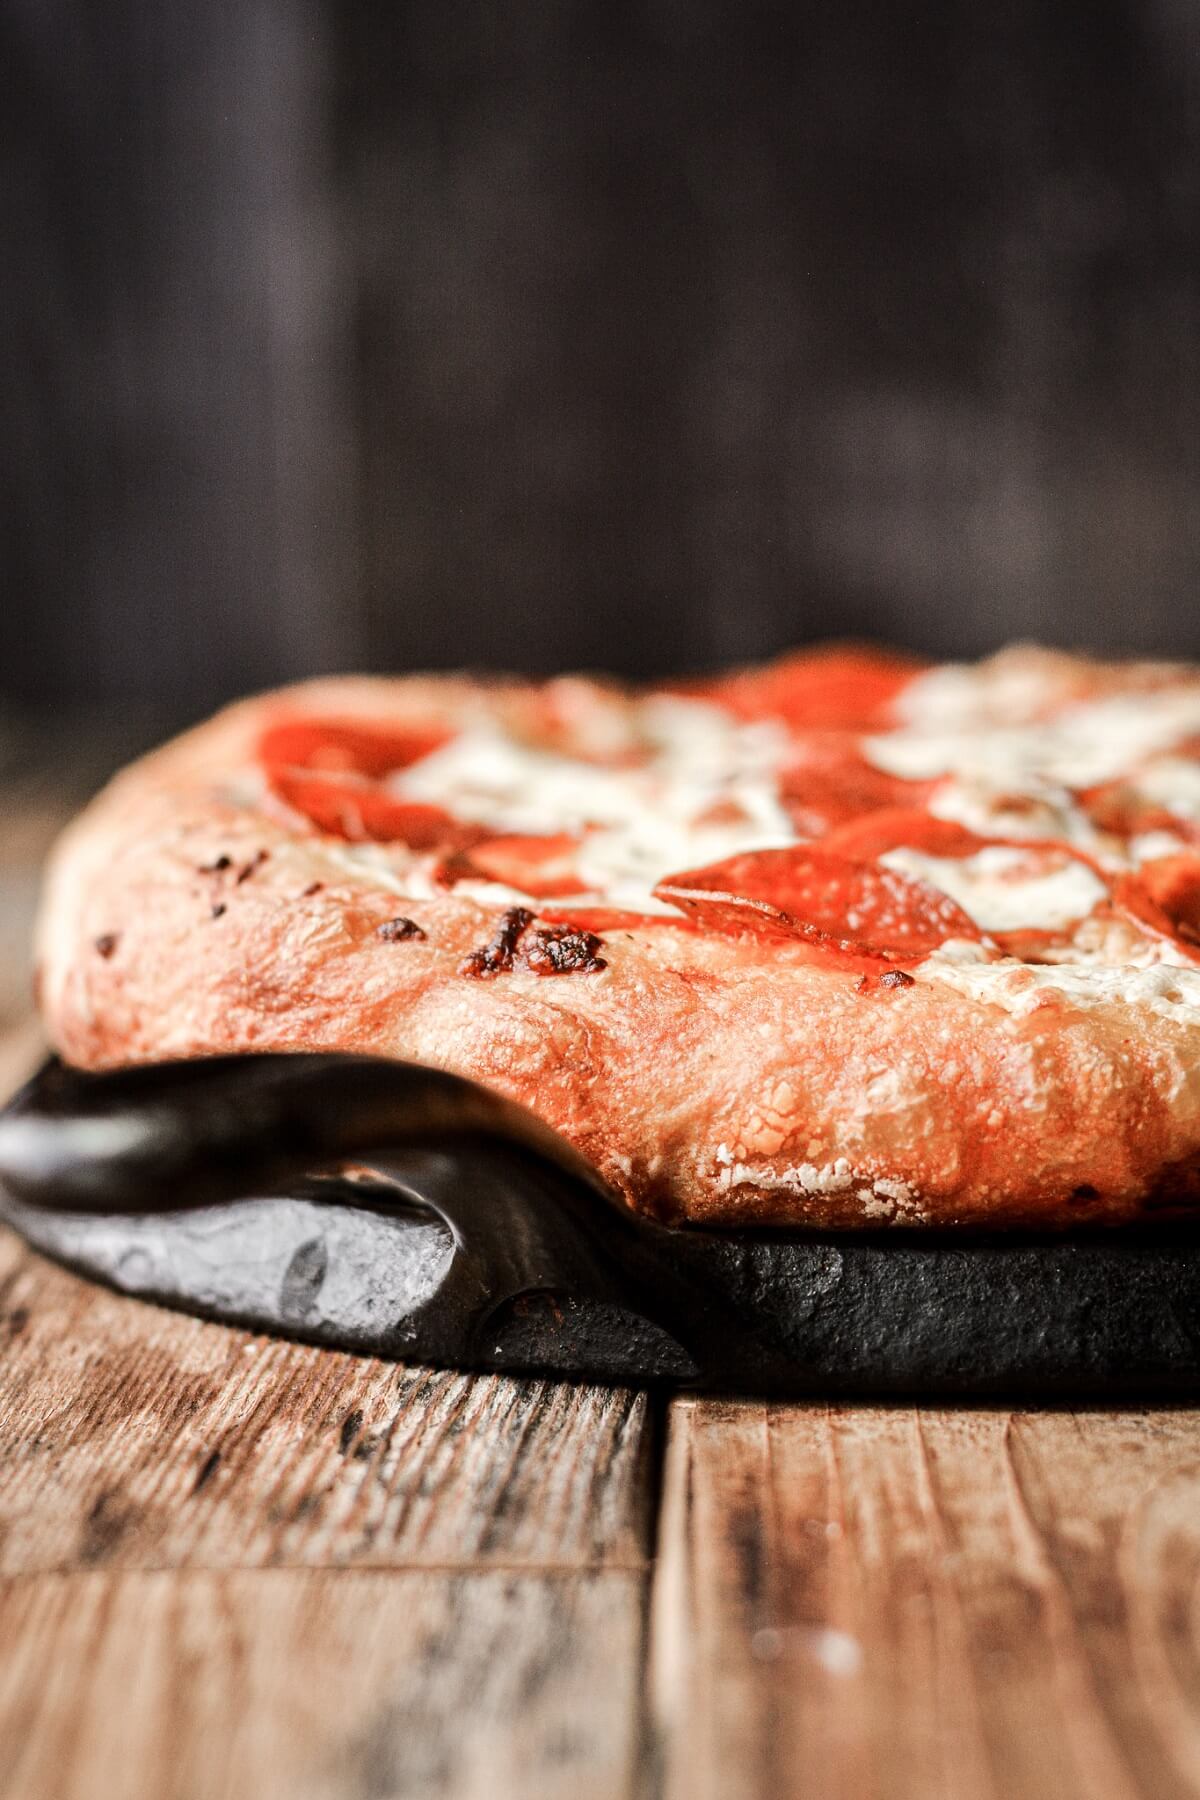 Pepperoni pizza baked in a cast iron pan.